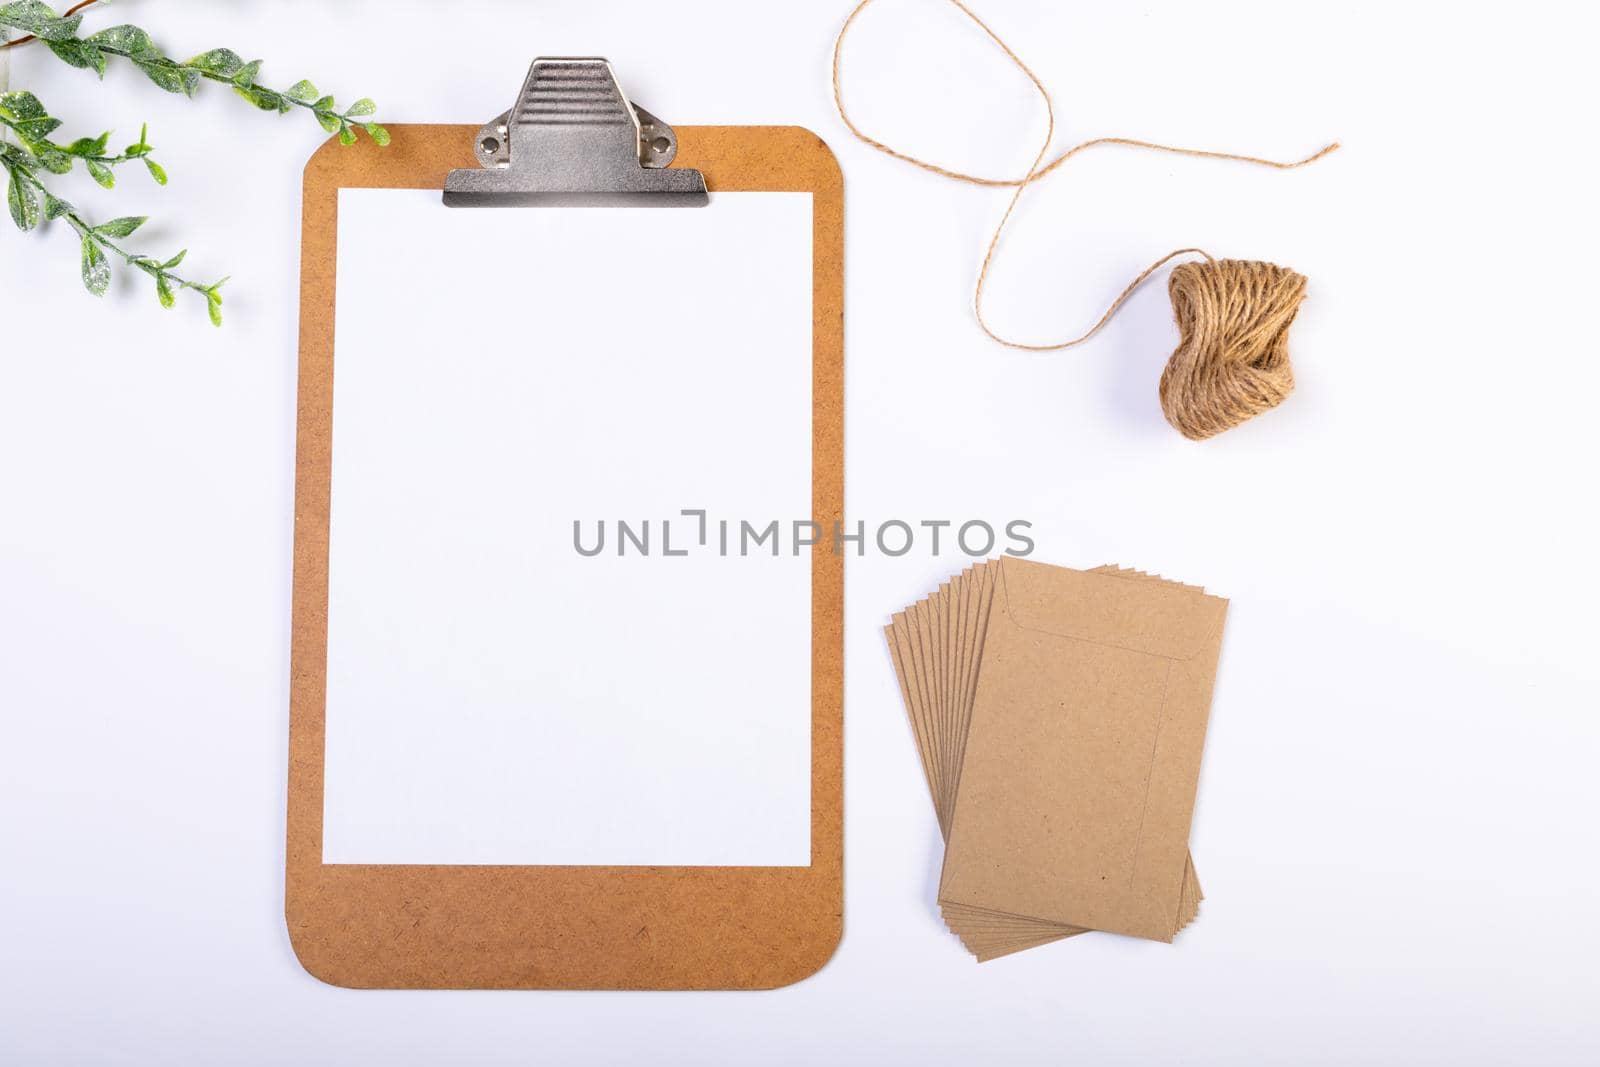 Composition of clipboard with copy space and envelopes, string, branches on white background by Wavebreakmedia